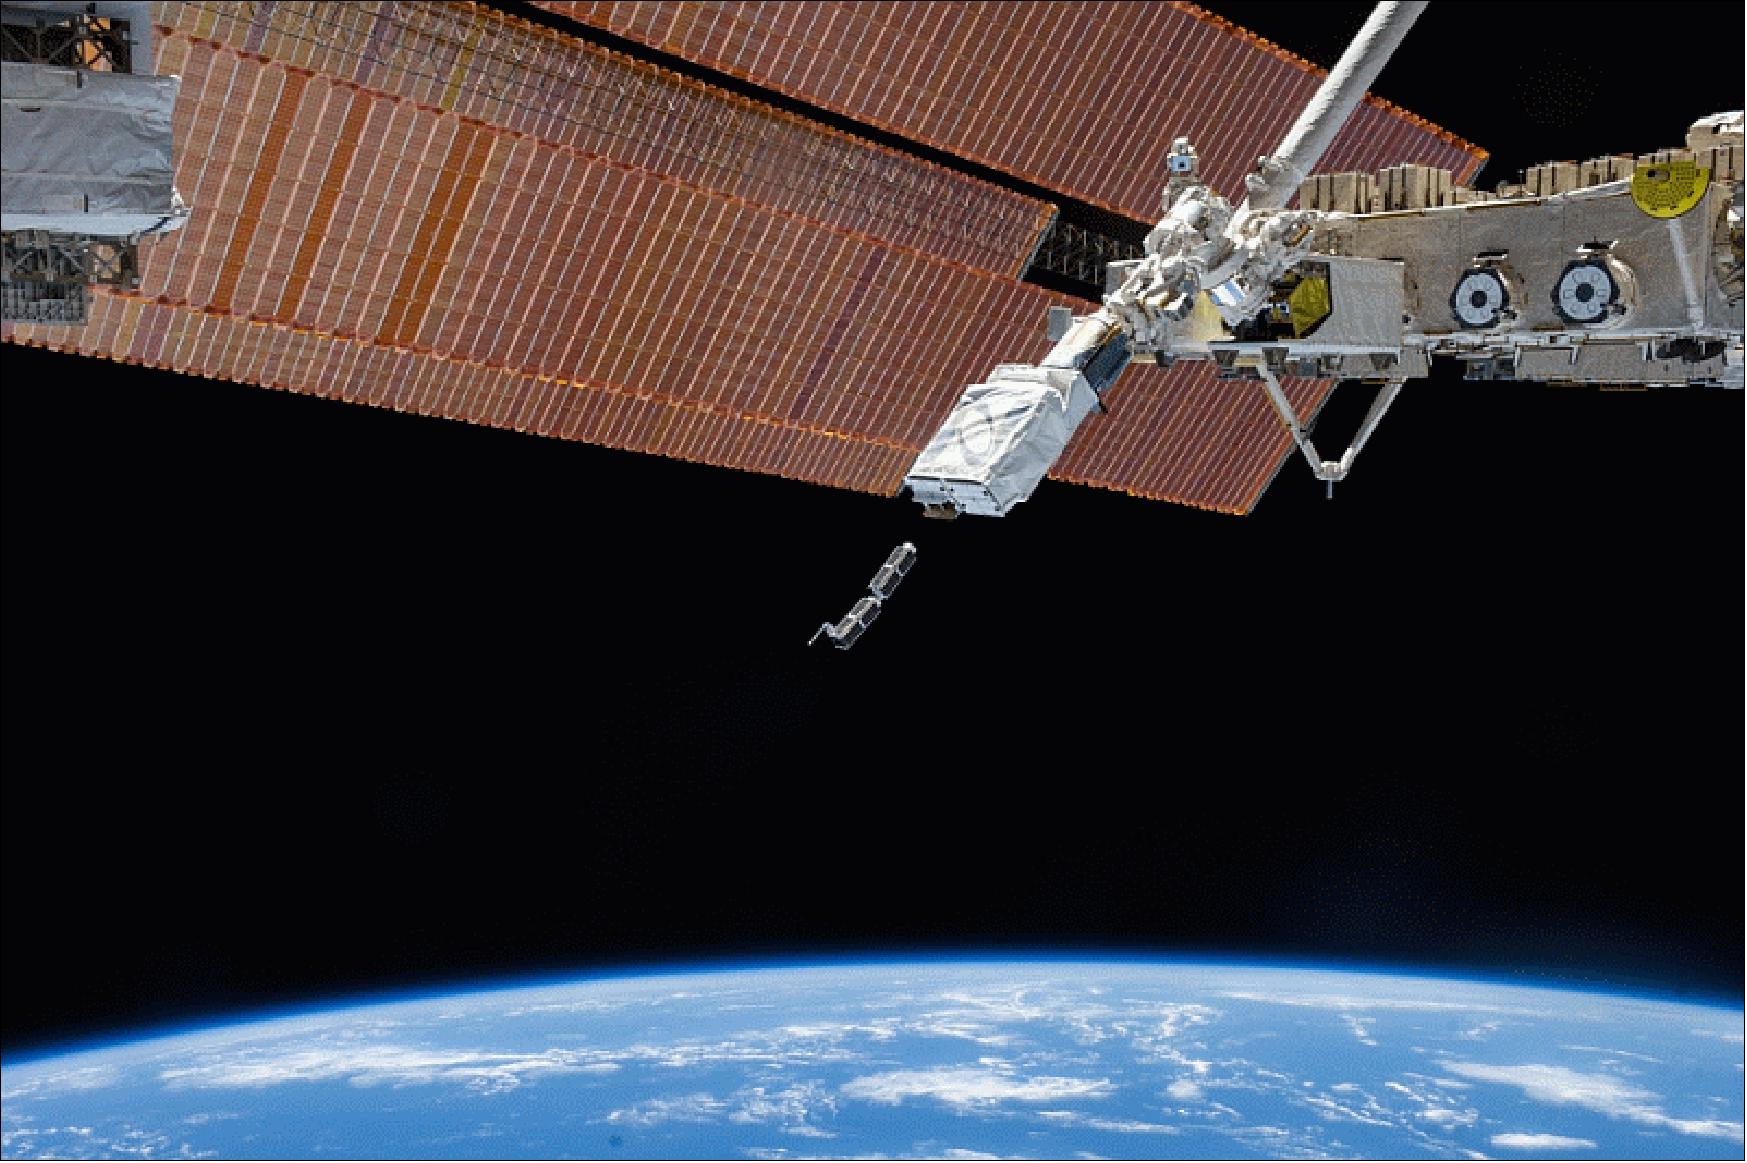 Figure 38: Deployment of the first two Flock 1A nanosatellites from the NanoRacks deployer system attached to the Kibo robotic arm (image credit: NASA)